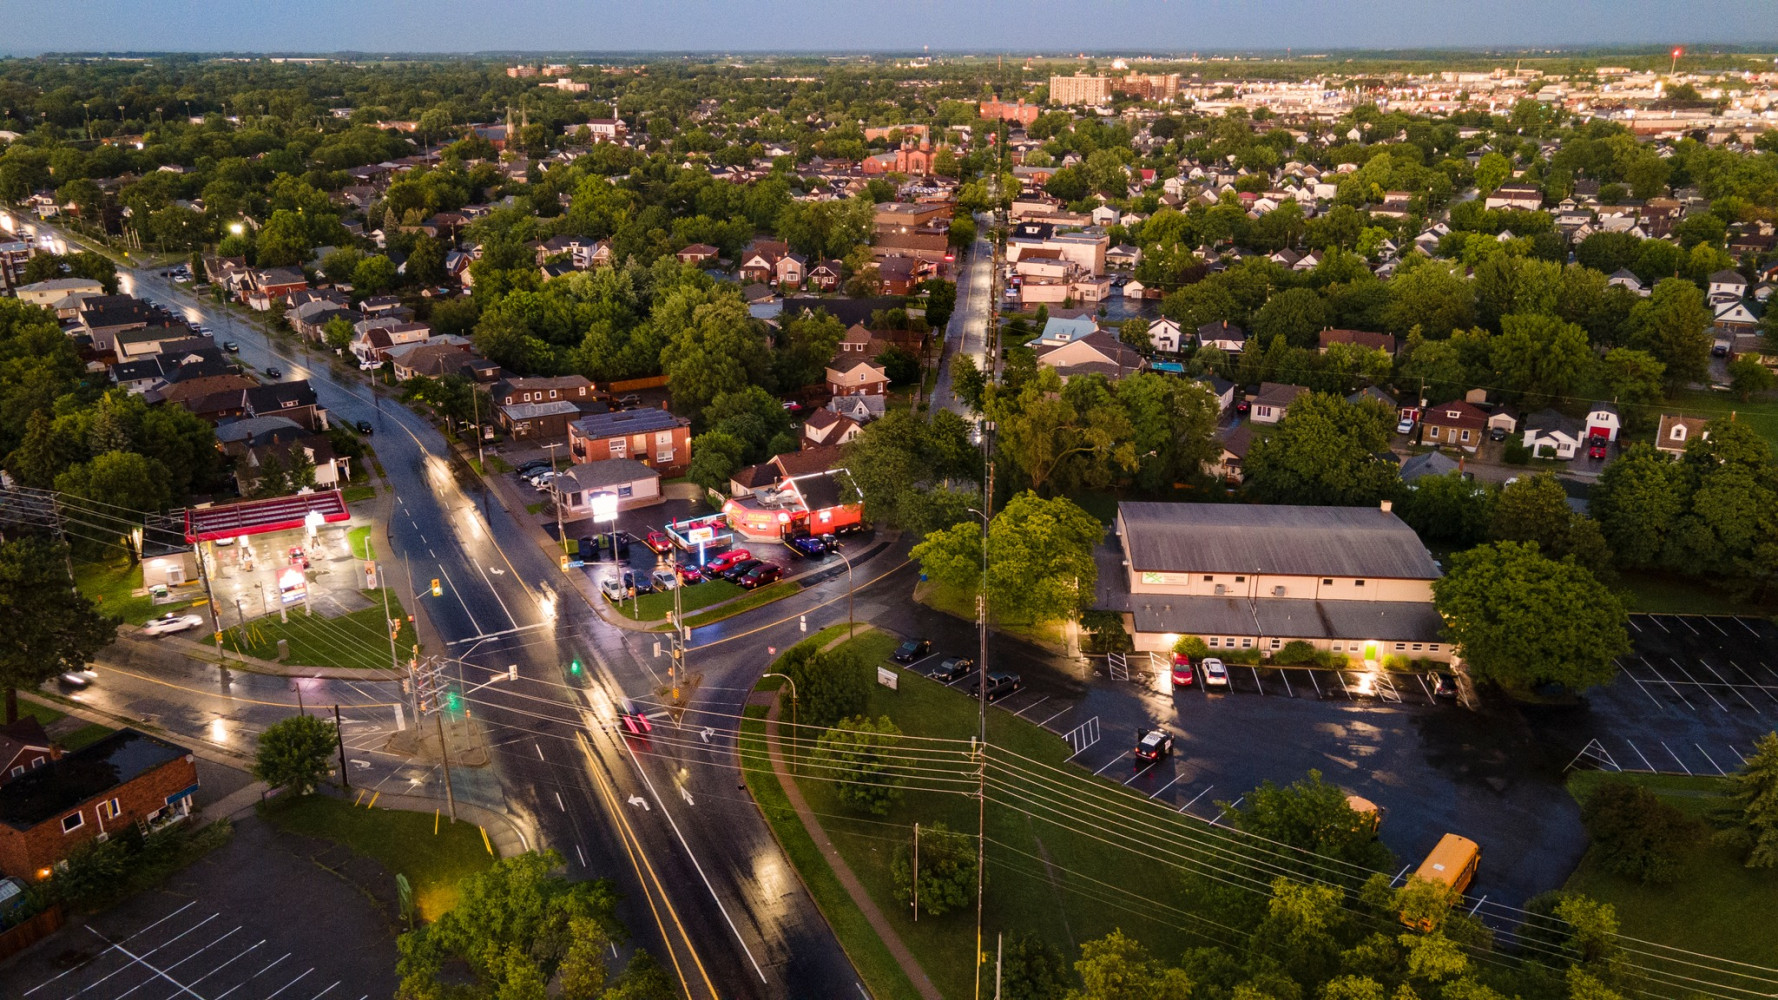 Citizens of St. Catharines’ Facer Street come together for their own future